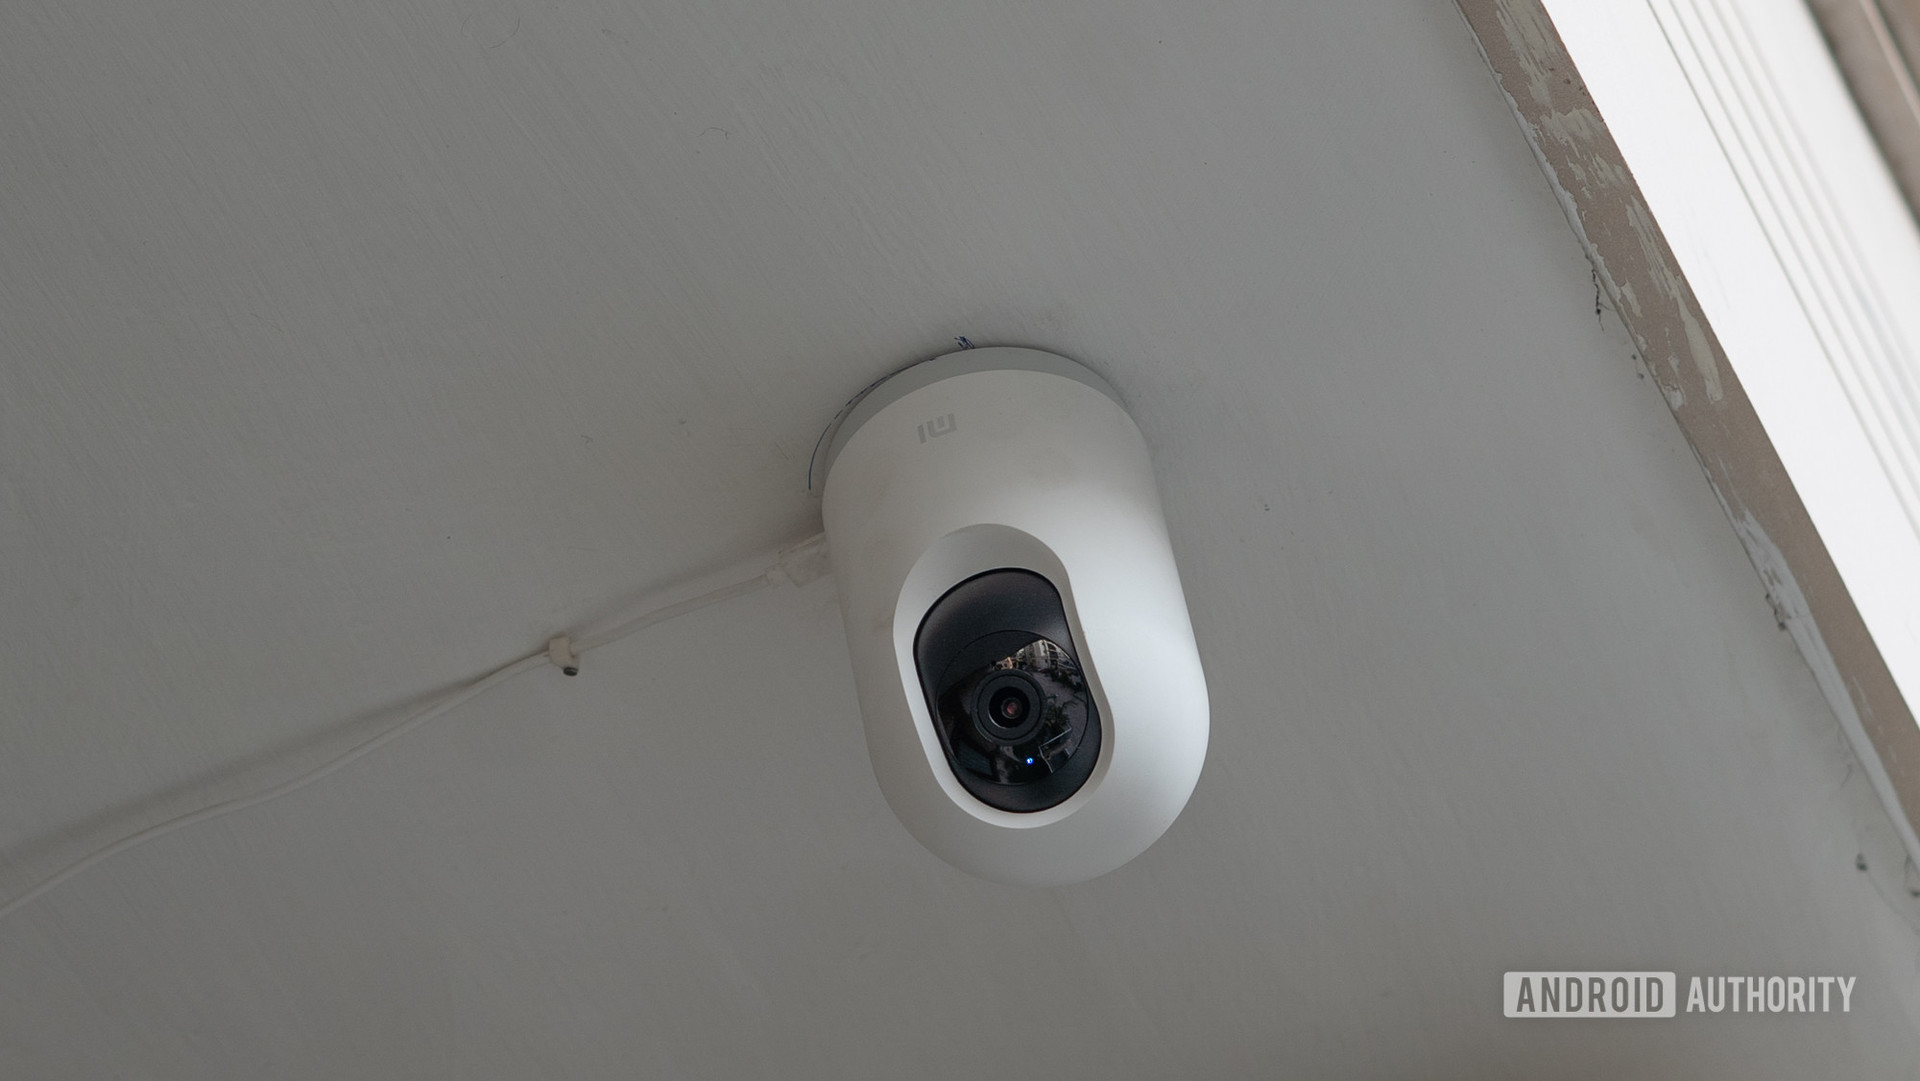 Mi 360 Home Security Camera 2K Pro mounted on ceiling